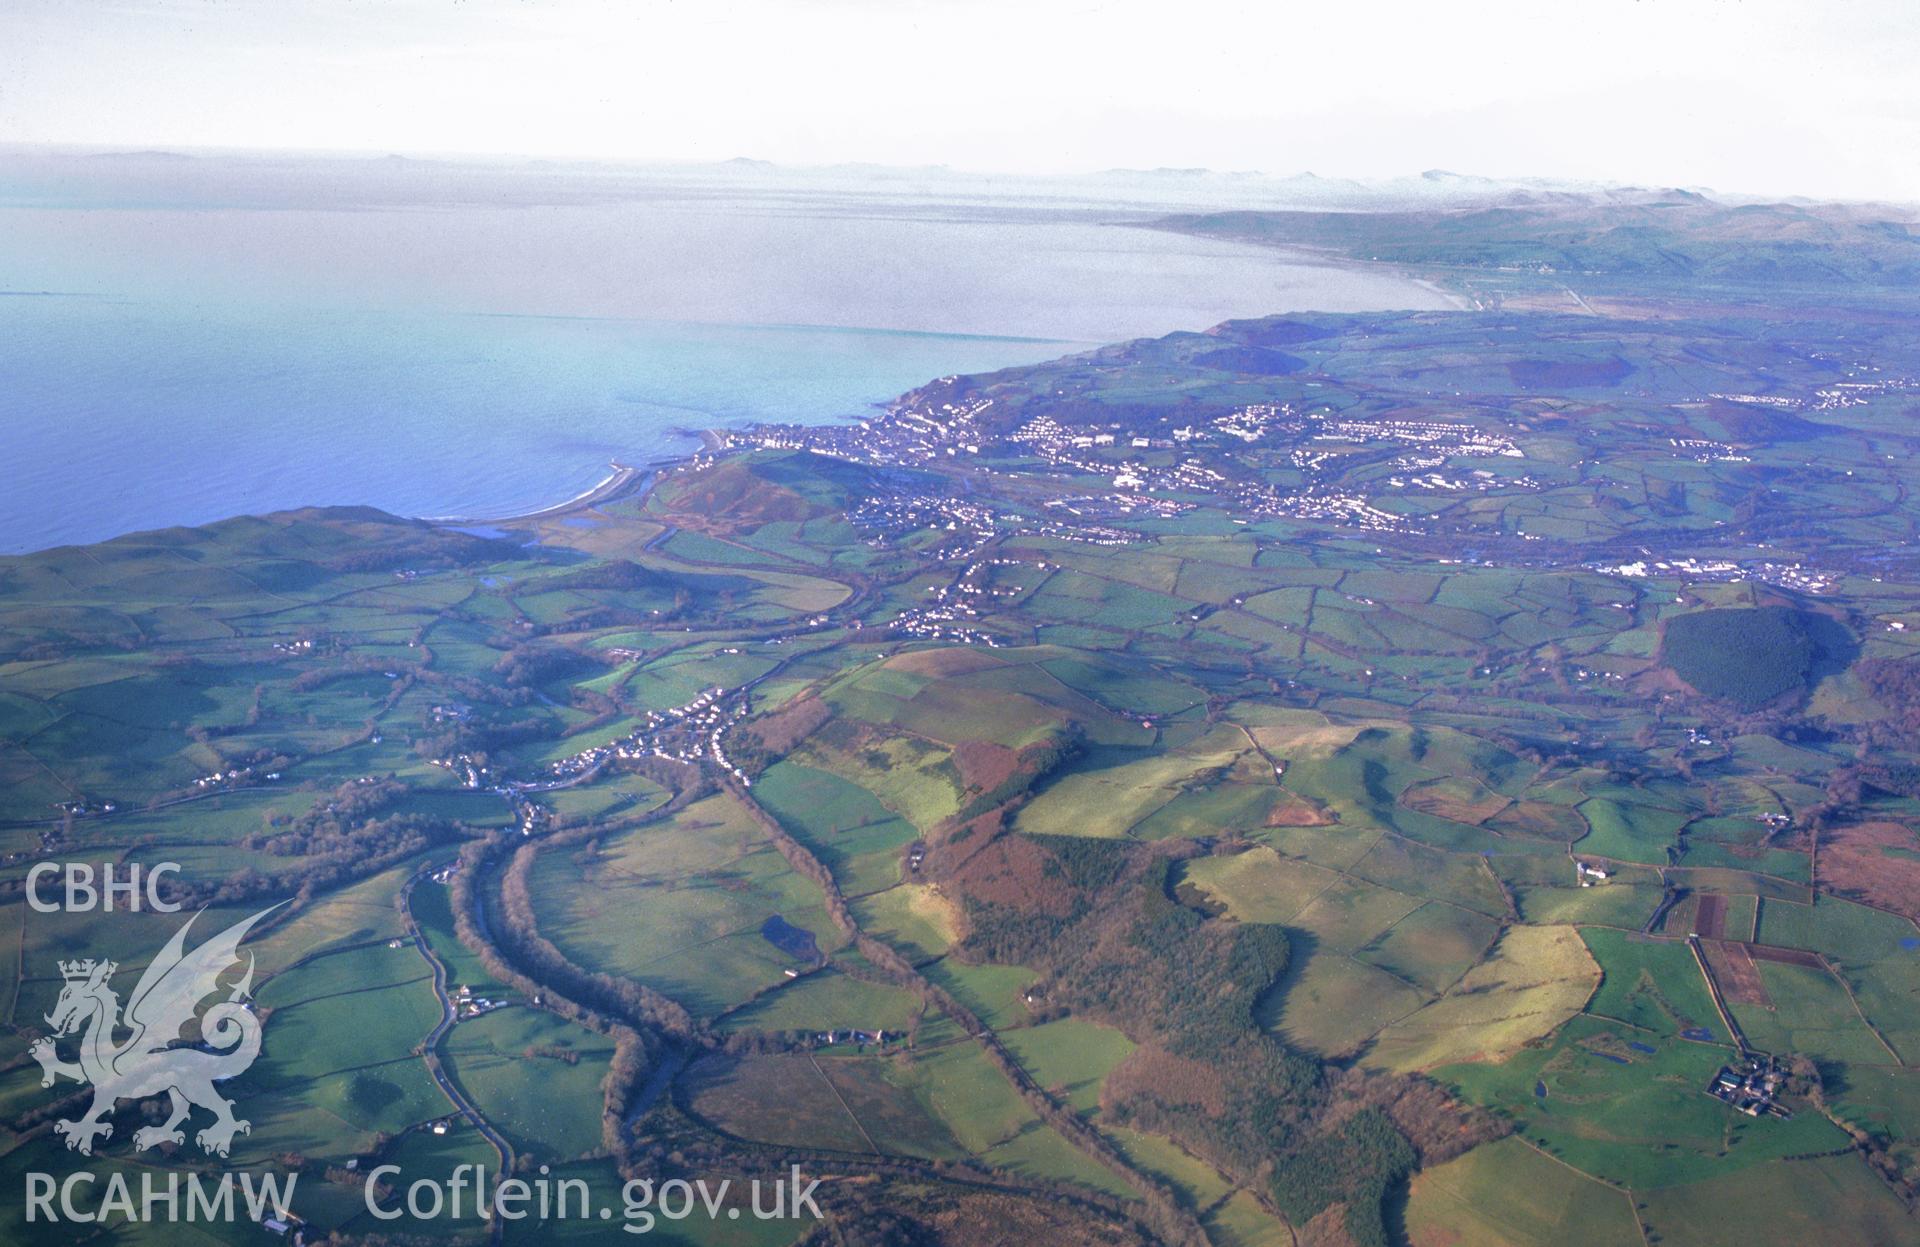 Slide of RCAHMW colour oblique aerial photograph of Aberystwyth and surrounding landscape, viewed from Llanfarian, taken by T.G. Driver, 13/2/2001.